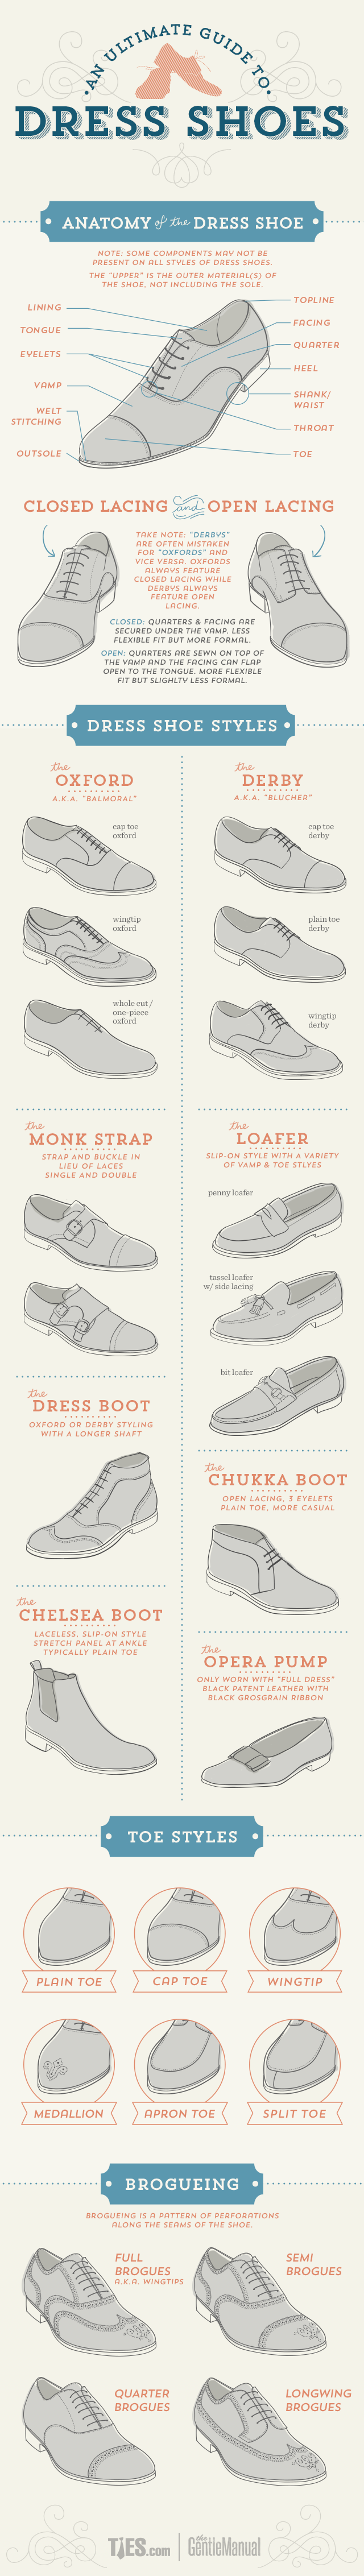 The Ultimate Suit Wearing Cheat Sheet Every Man Needs - The Ultimate Suit Wearing Cheat Sheet Every Man Needs -   15 style Guides shoes ideas